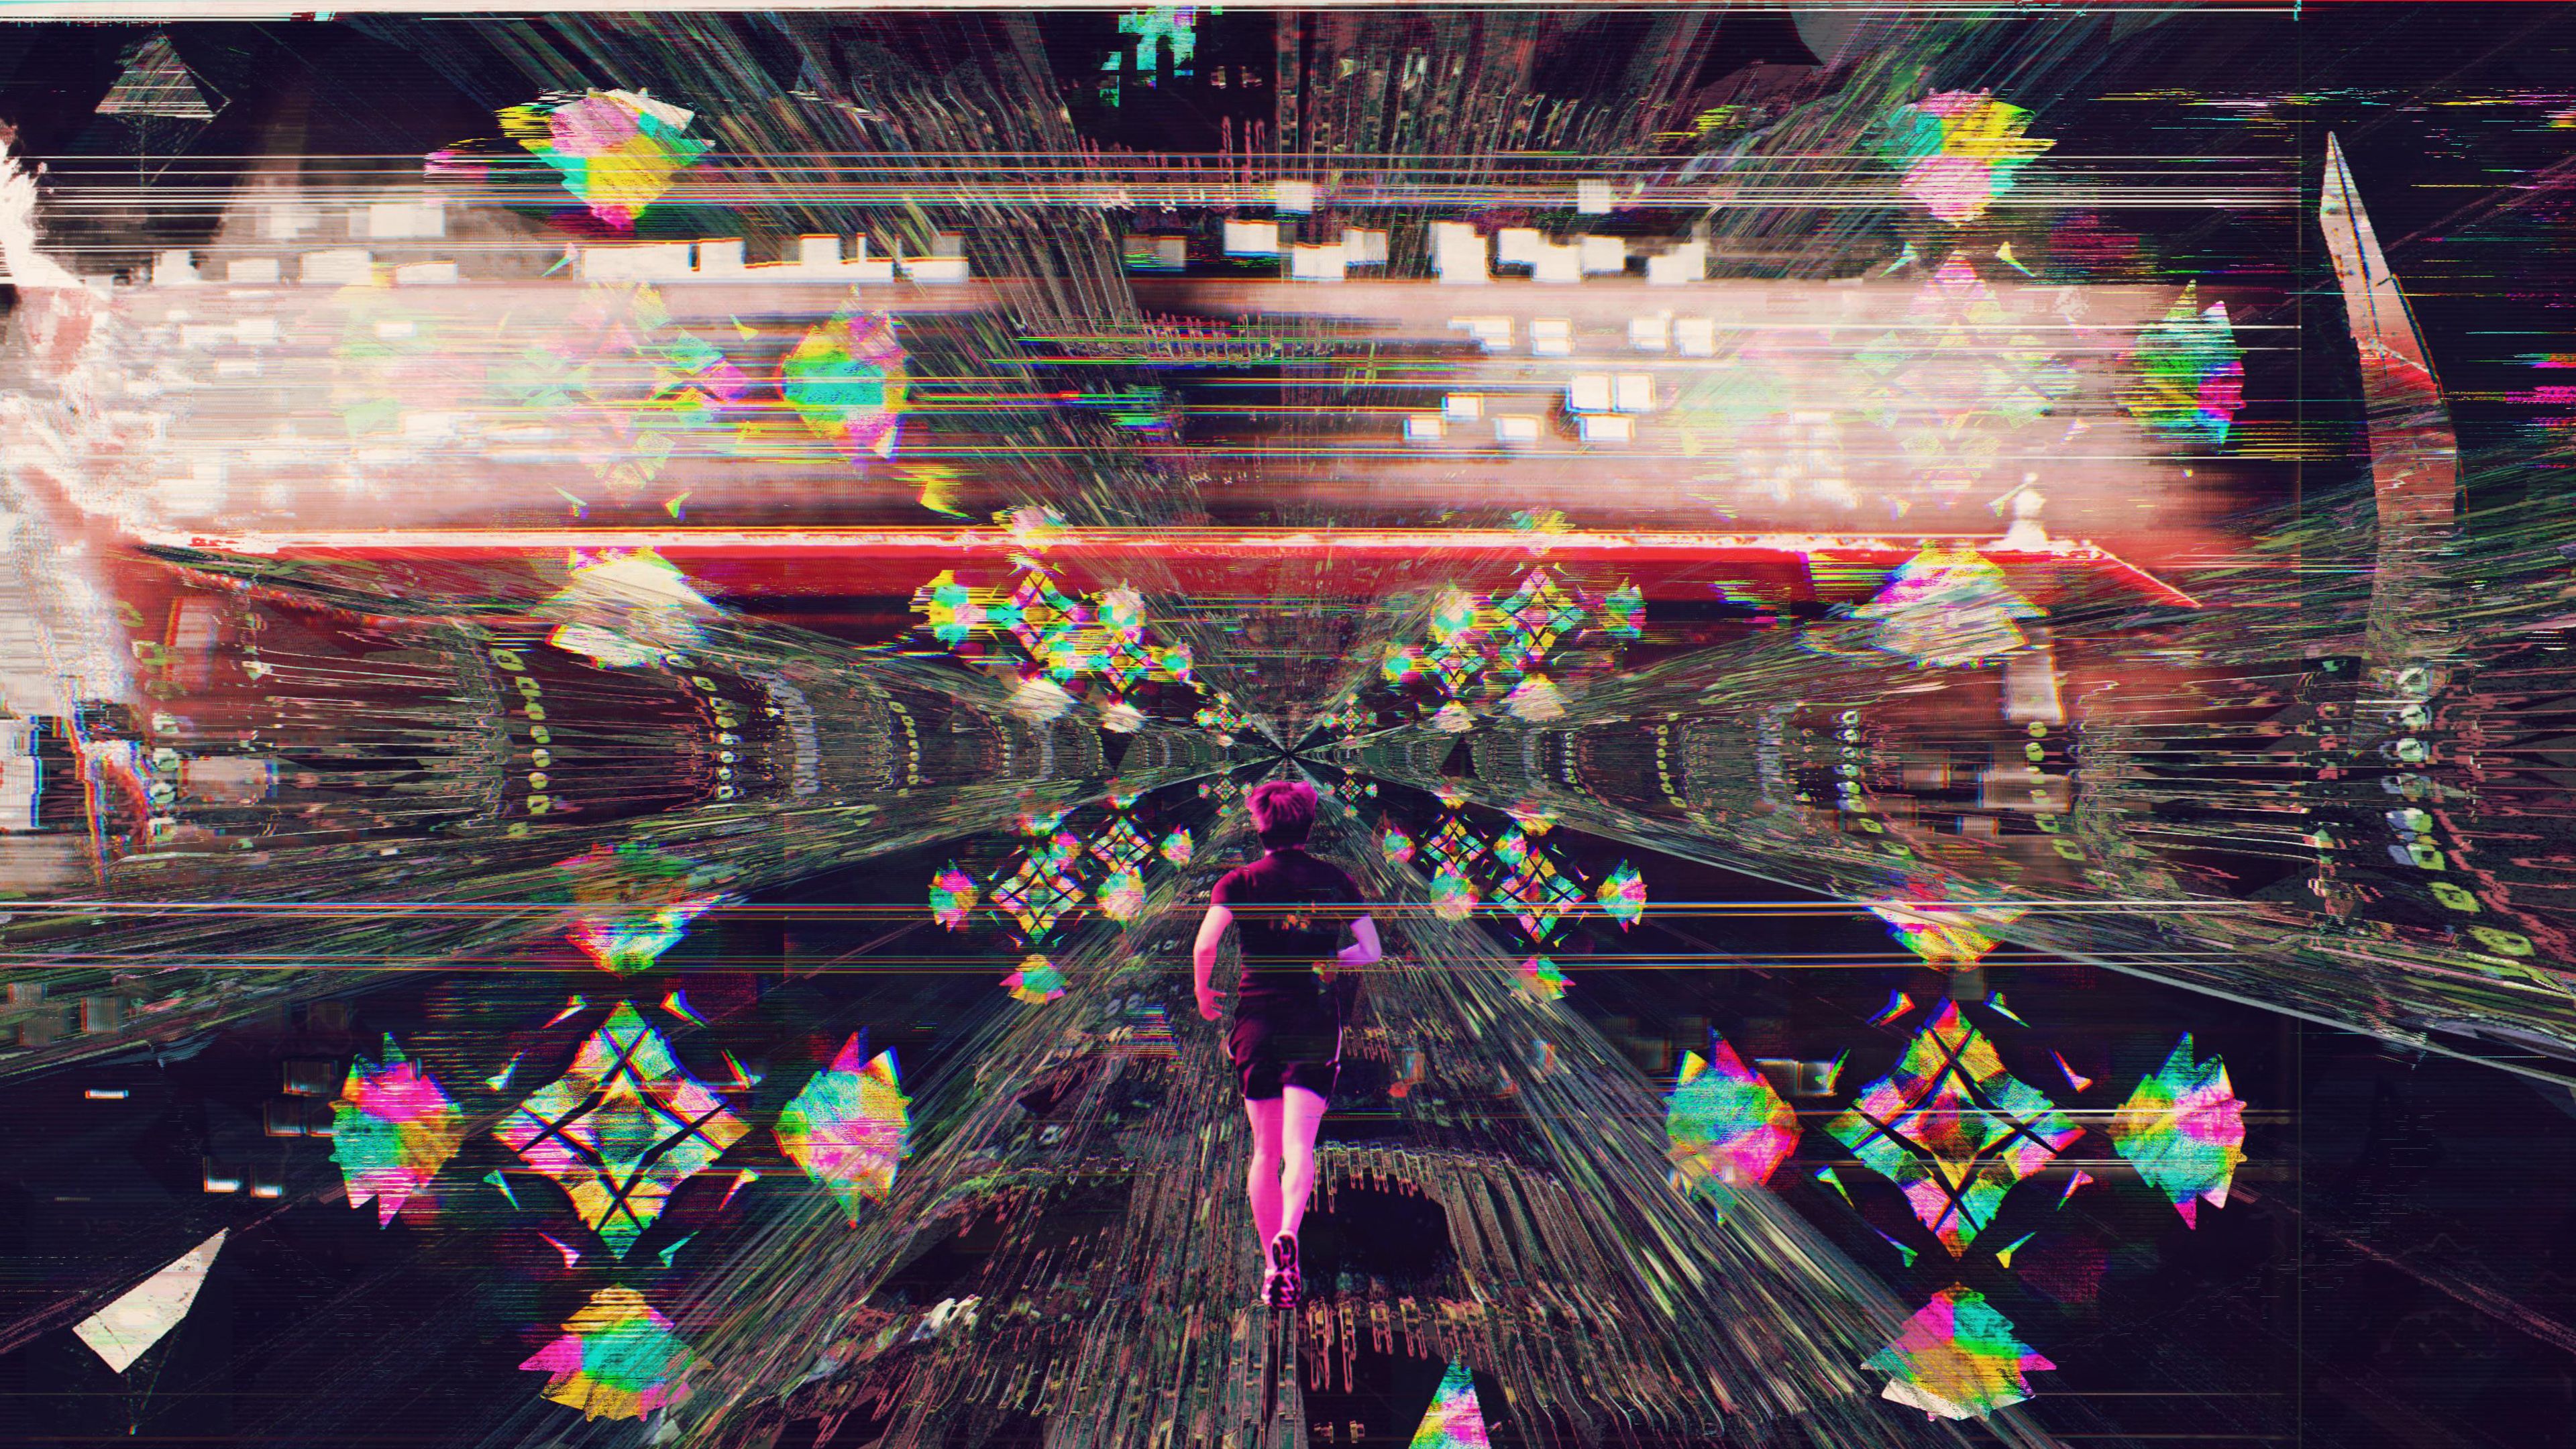 A woman standing in a room with the walls and ceiling covered in colorful projections. - Glitch